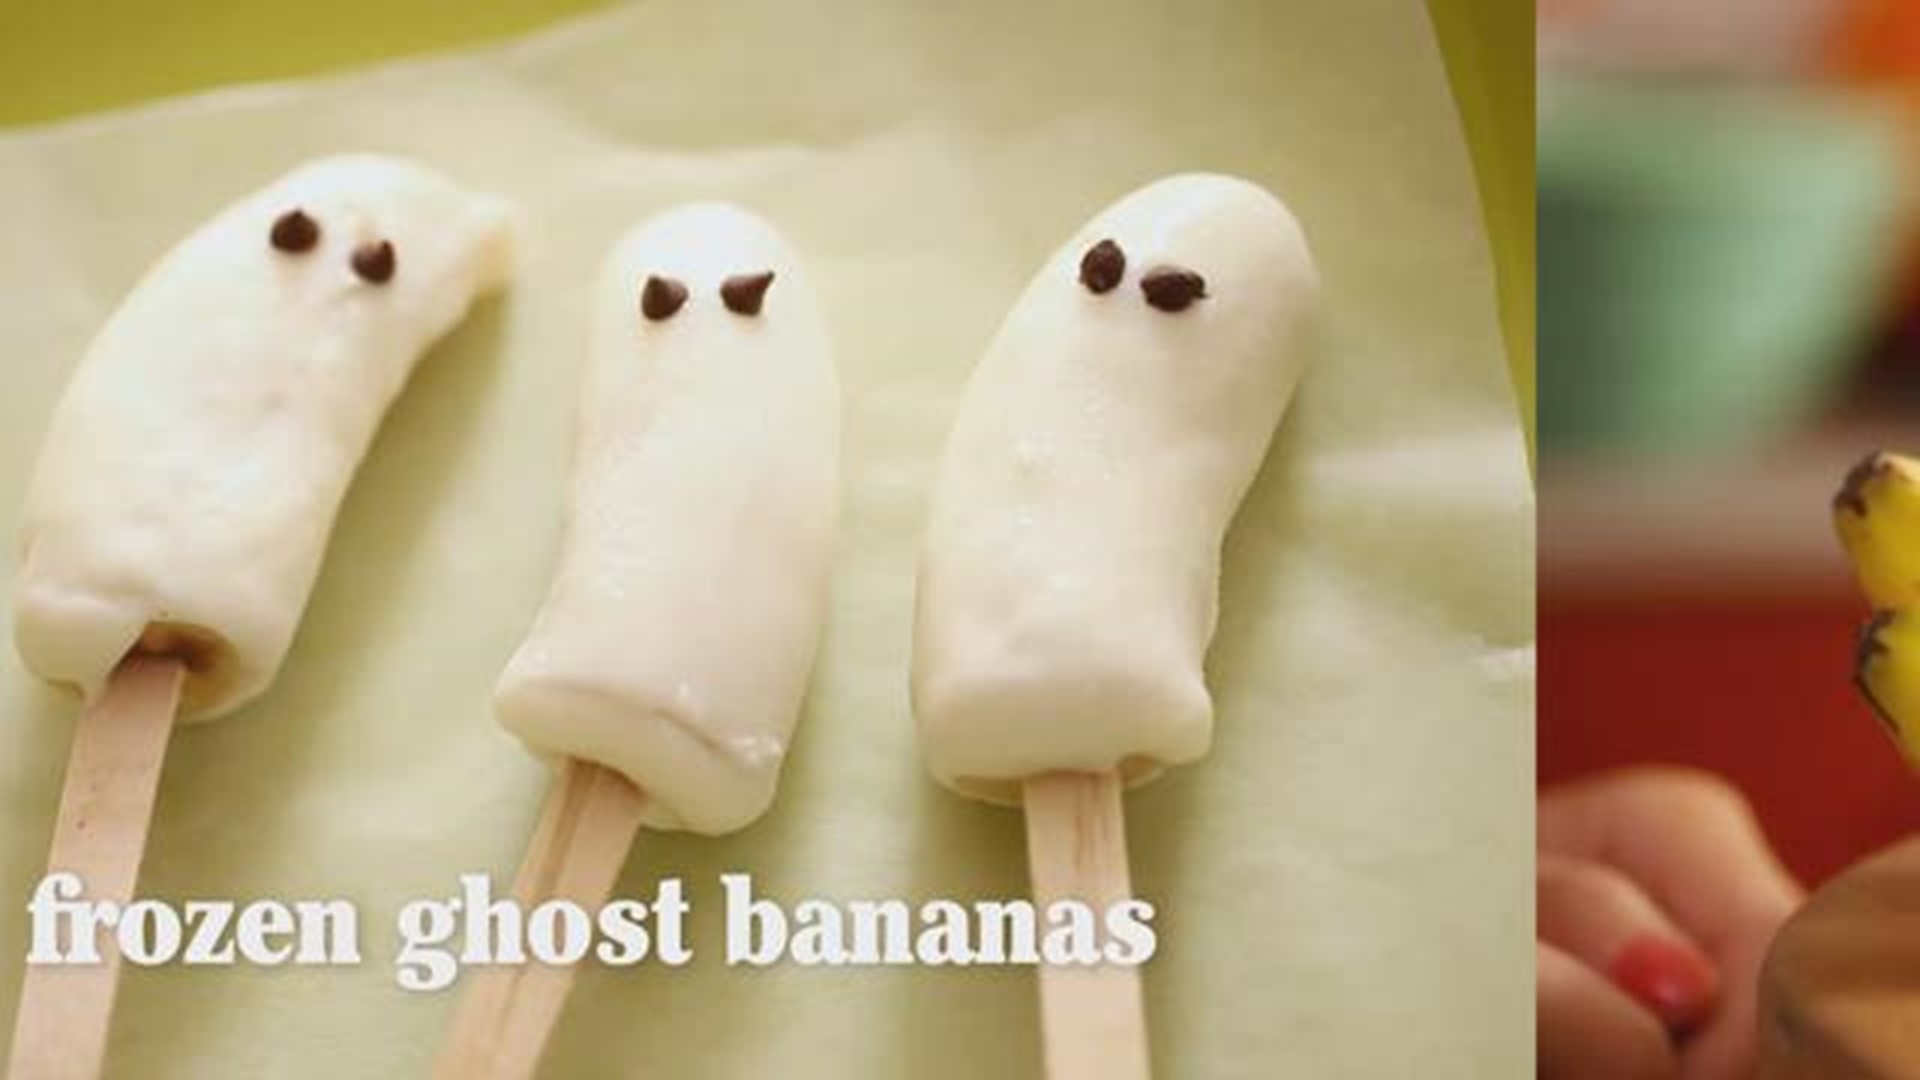 Not-too-spooky fruit snacks perfect for Halloween!